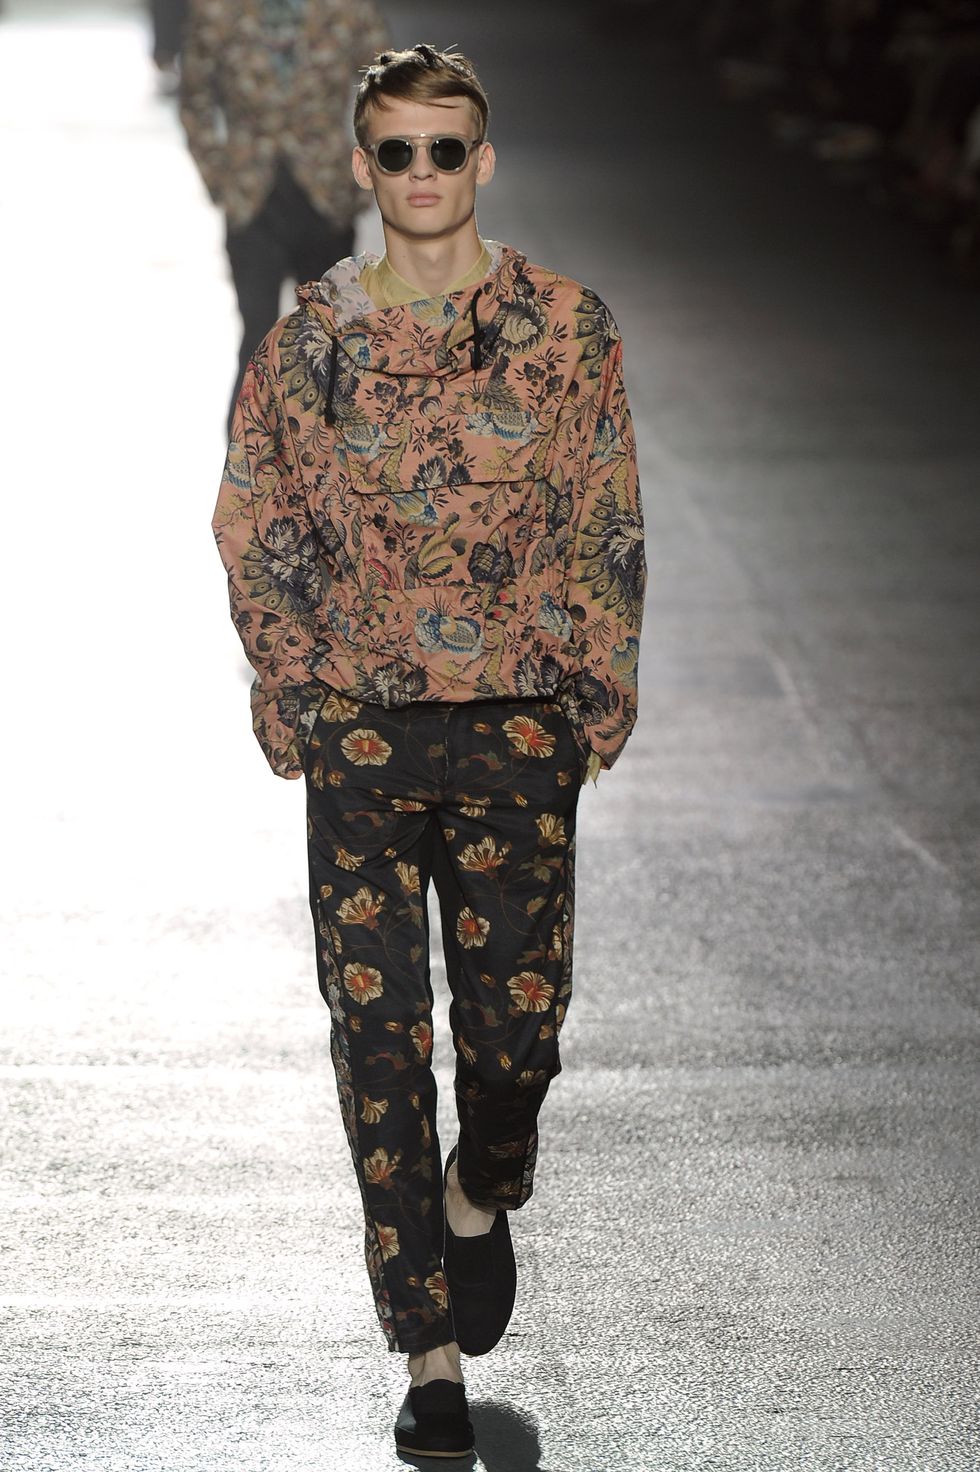 paris, france june 27 a model walks the runway at the dries van noten spring summer 2014 fashion show during paris menswear fashion week on june 27, 2013 in paris, france photo by catwalkinggetty images